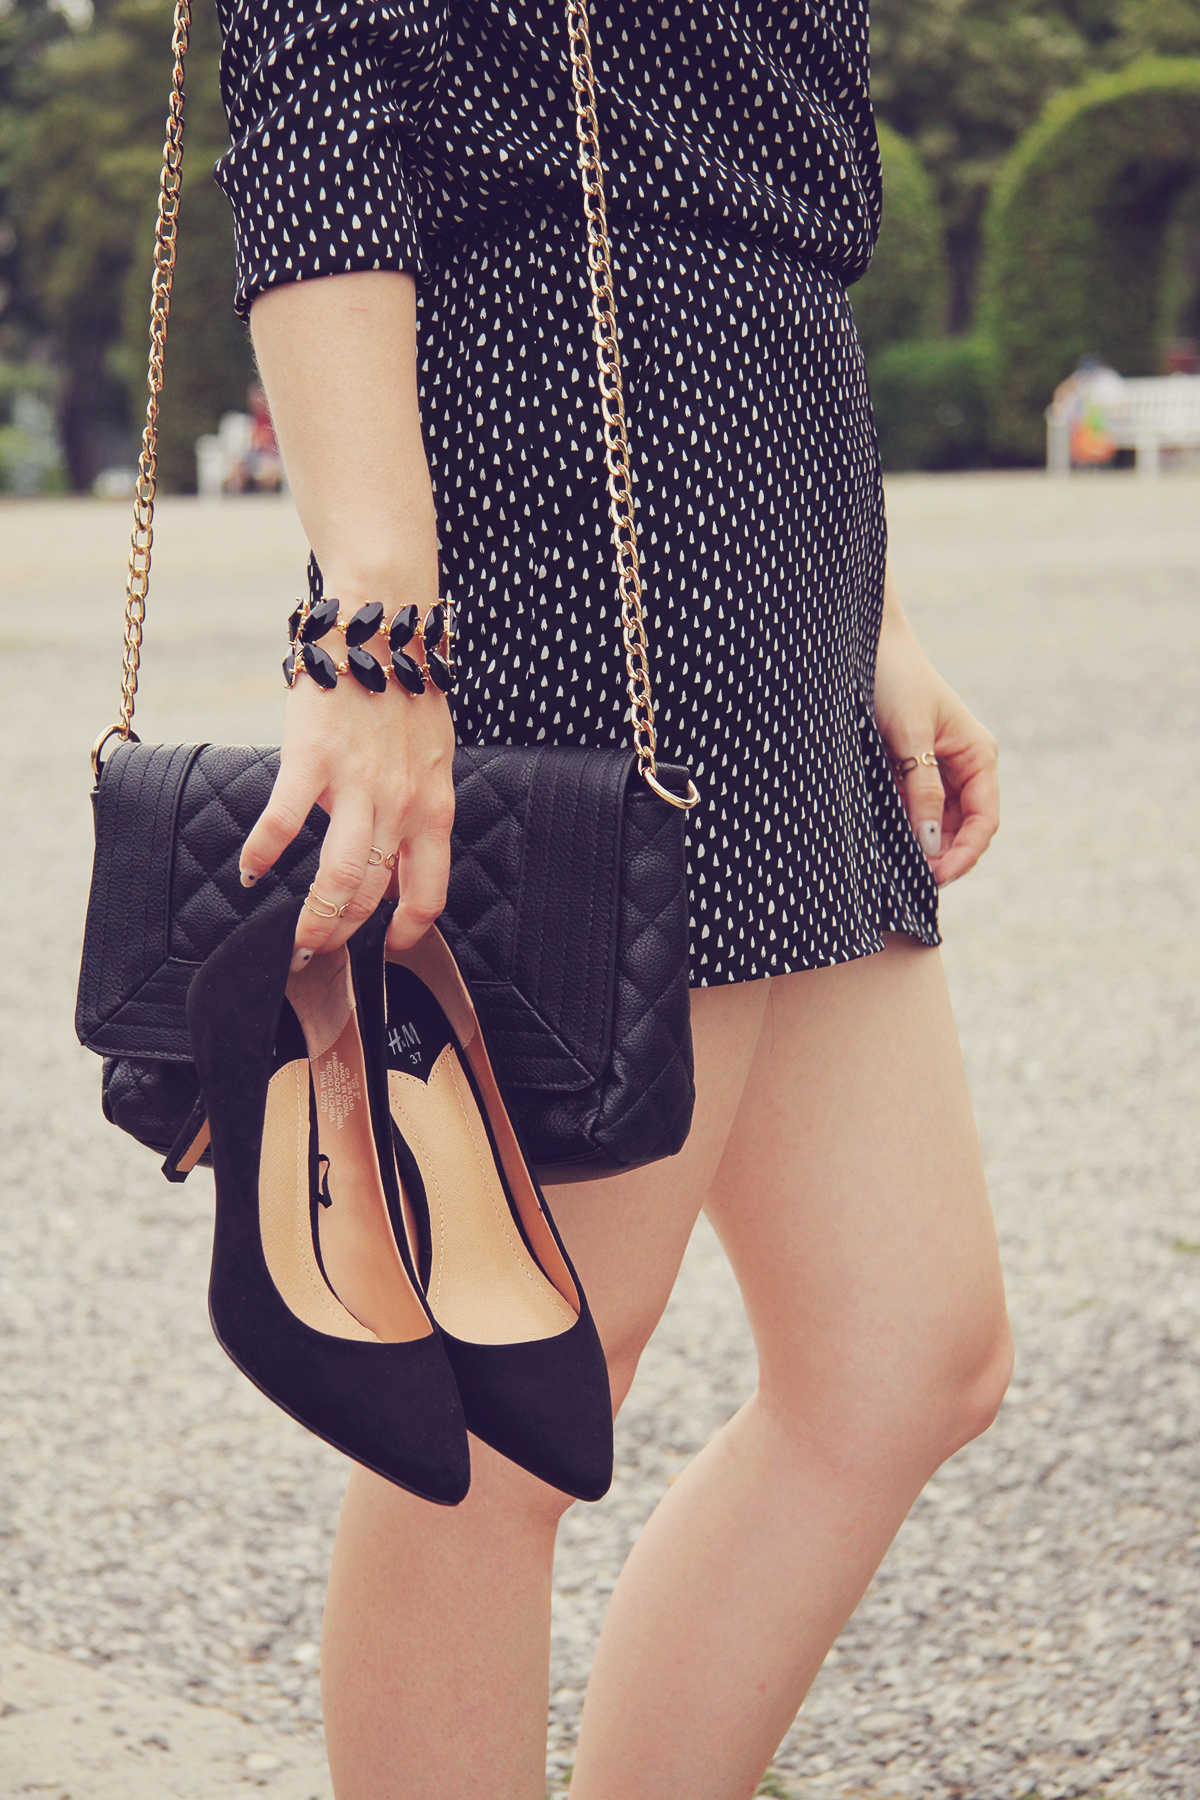 black pumps and accessories